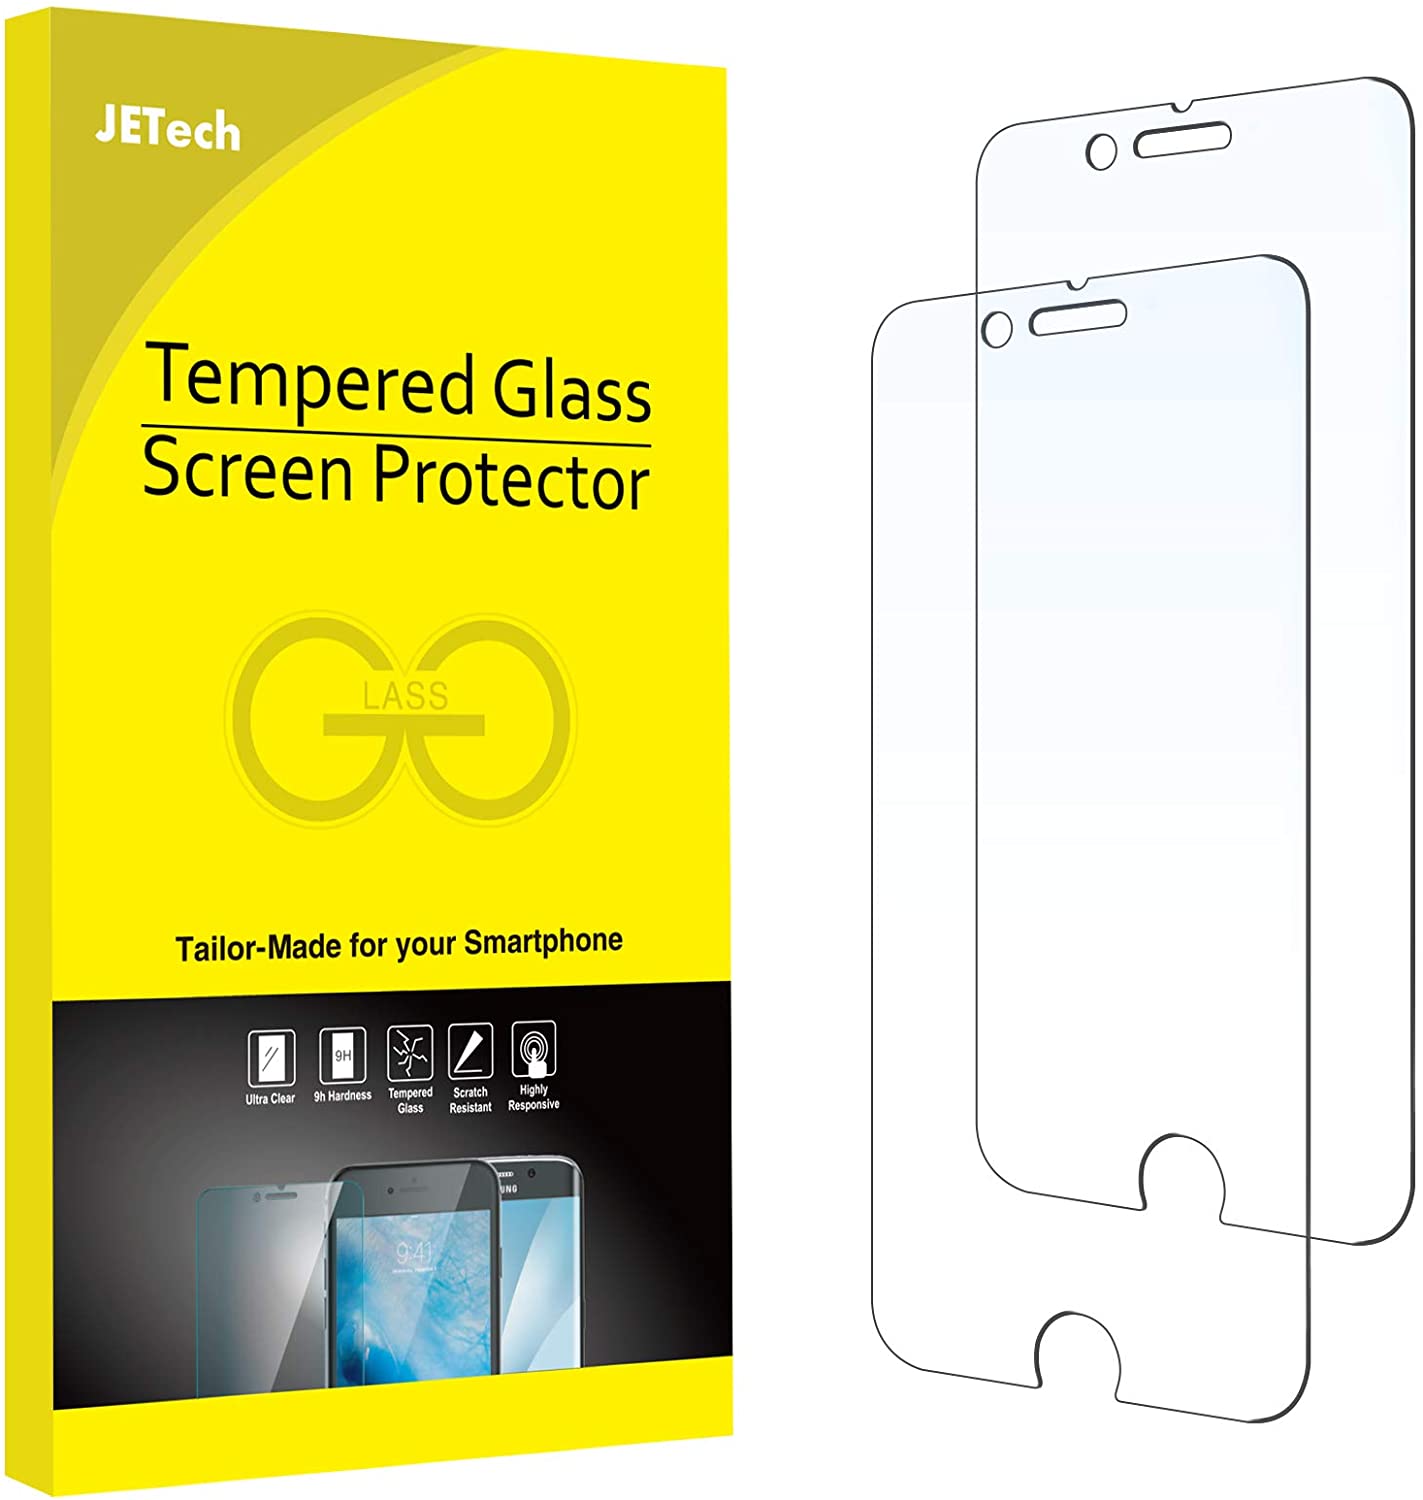 jetech-screen-protector-for-iphone-8-plus-and-iphone-7-plus-55-inch-tempered-glass-film-2-pack-2021-2-28